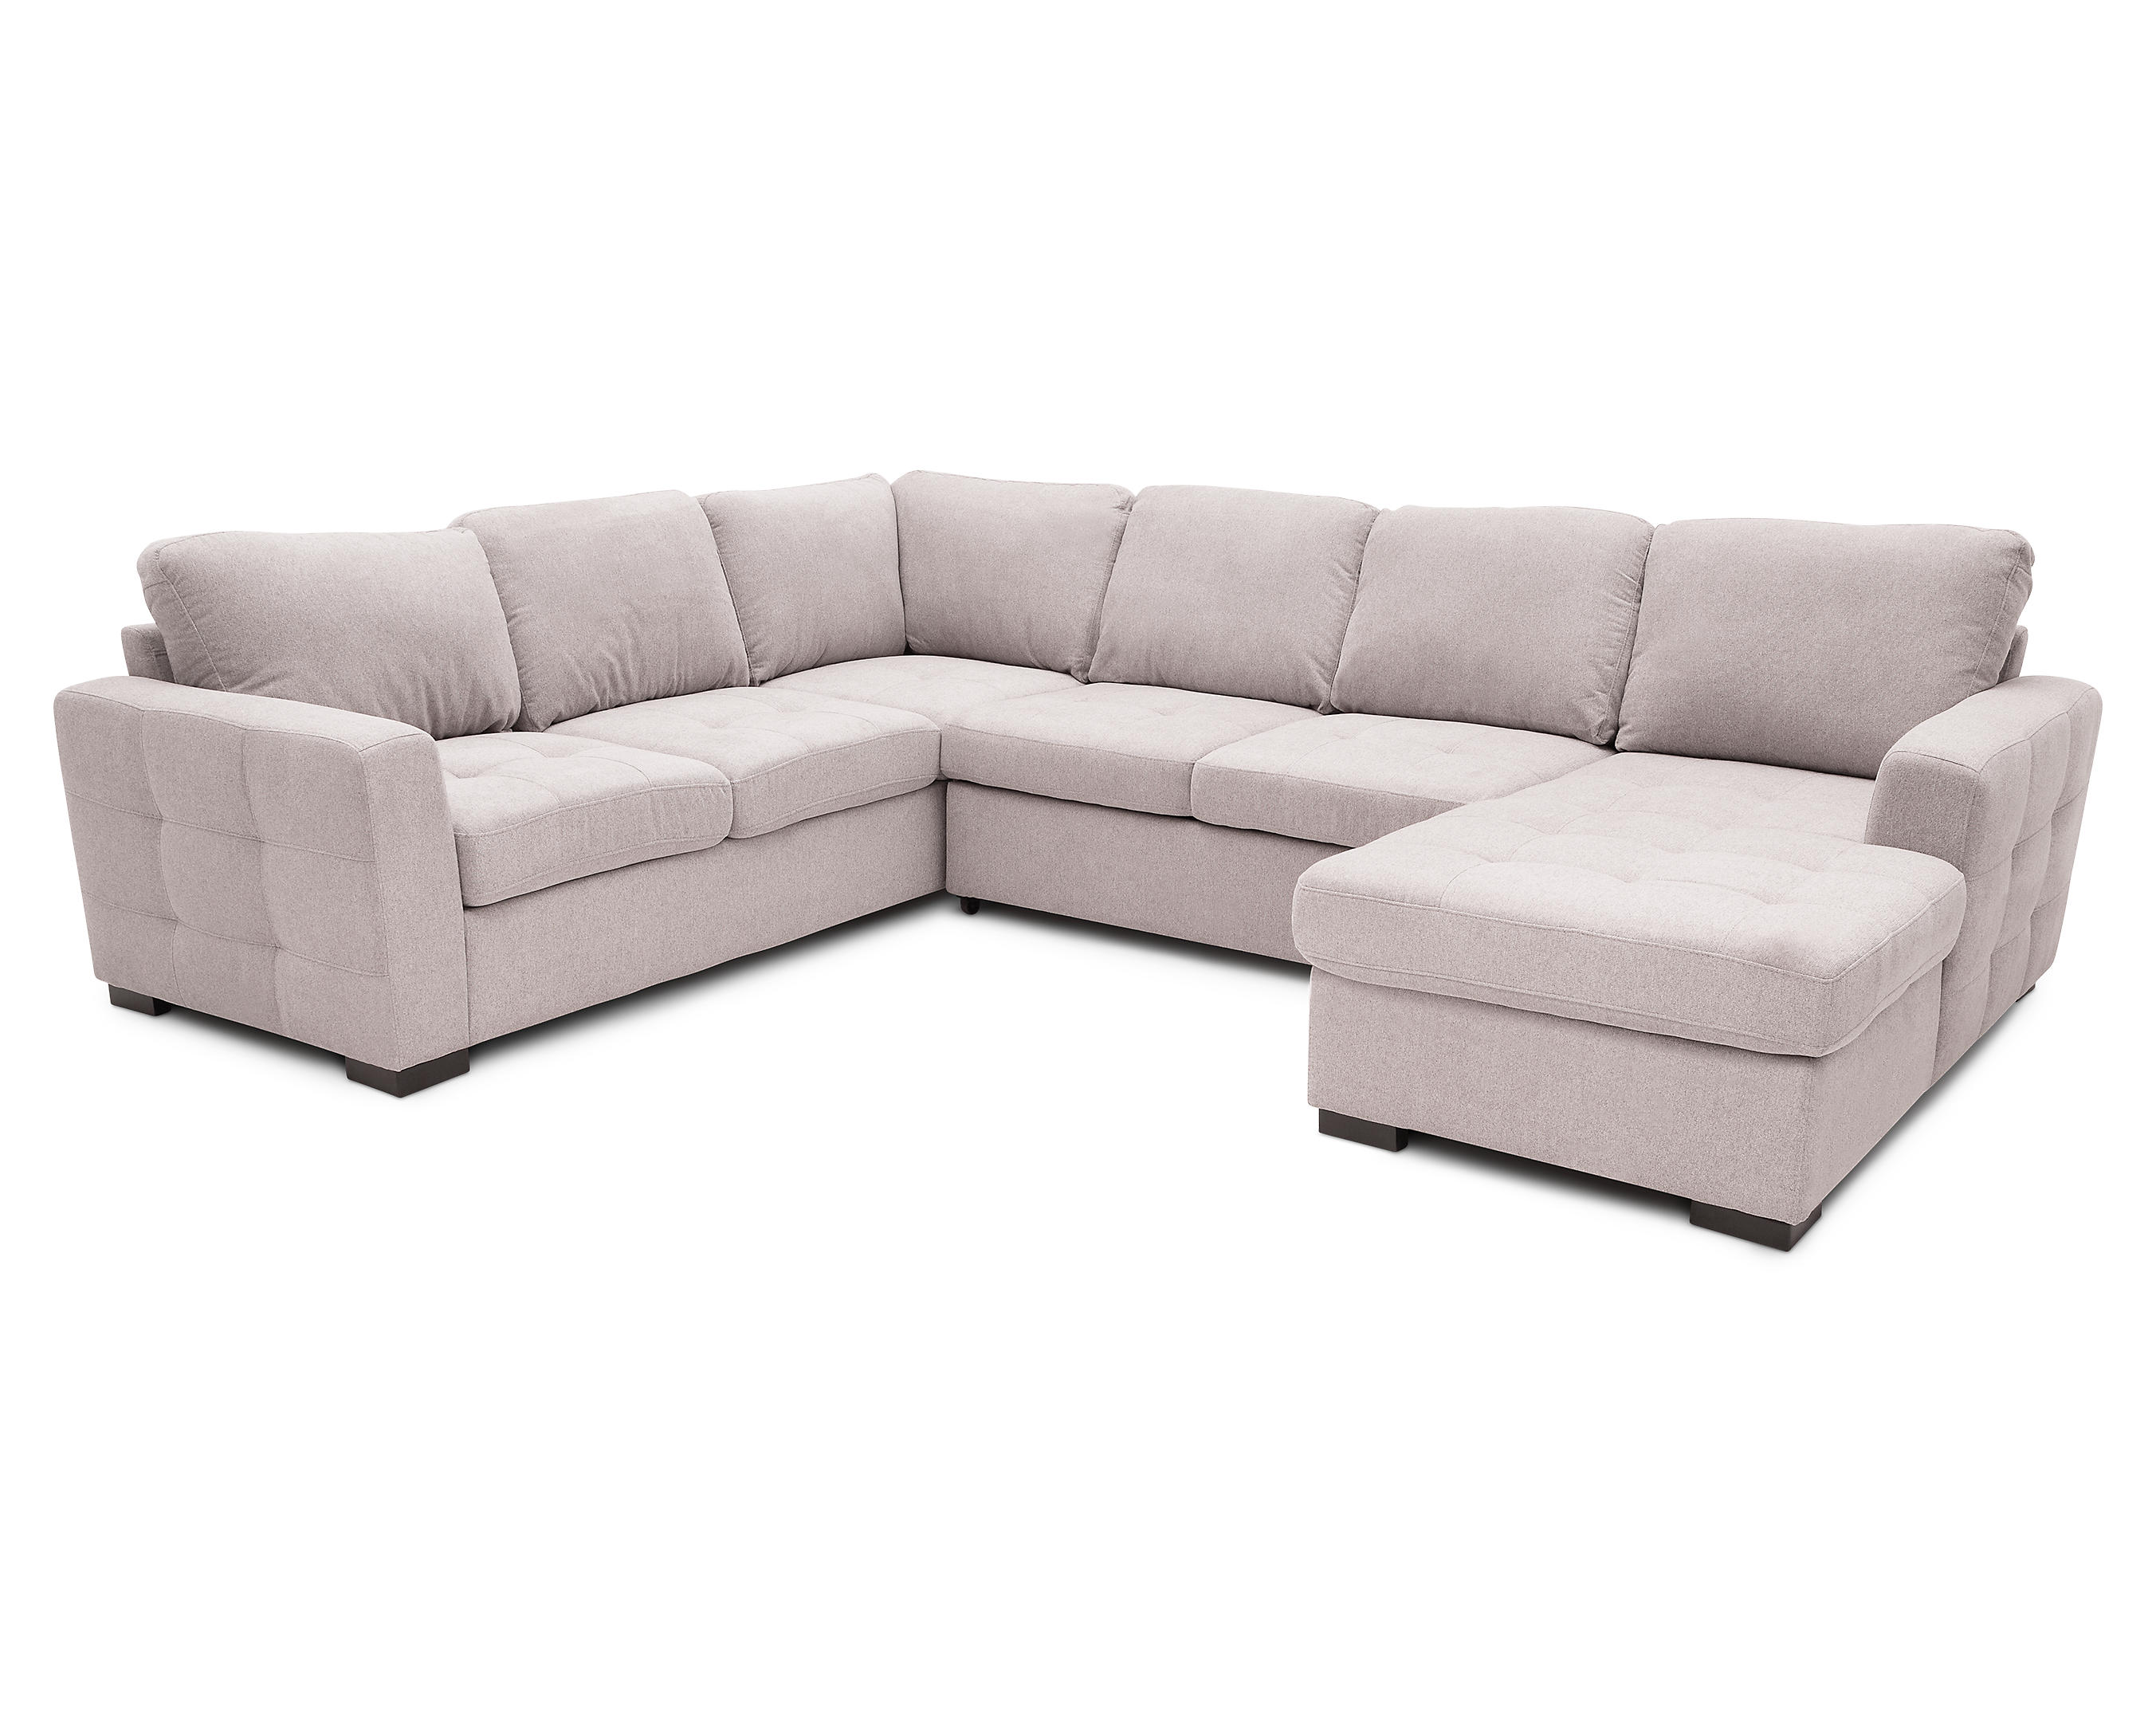 Caruso 3 Pc Fabric Sleeper Sectional, Sectional Sofa Set With Pull Out Sleeper Area